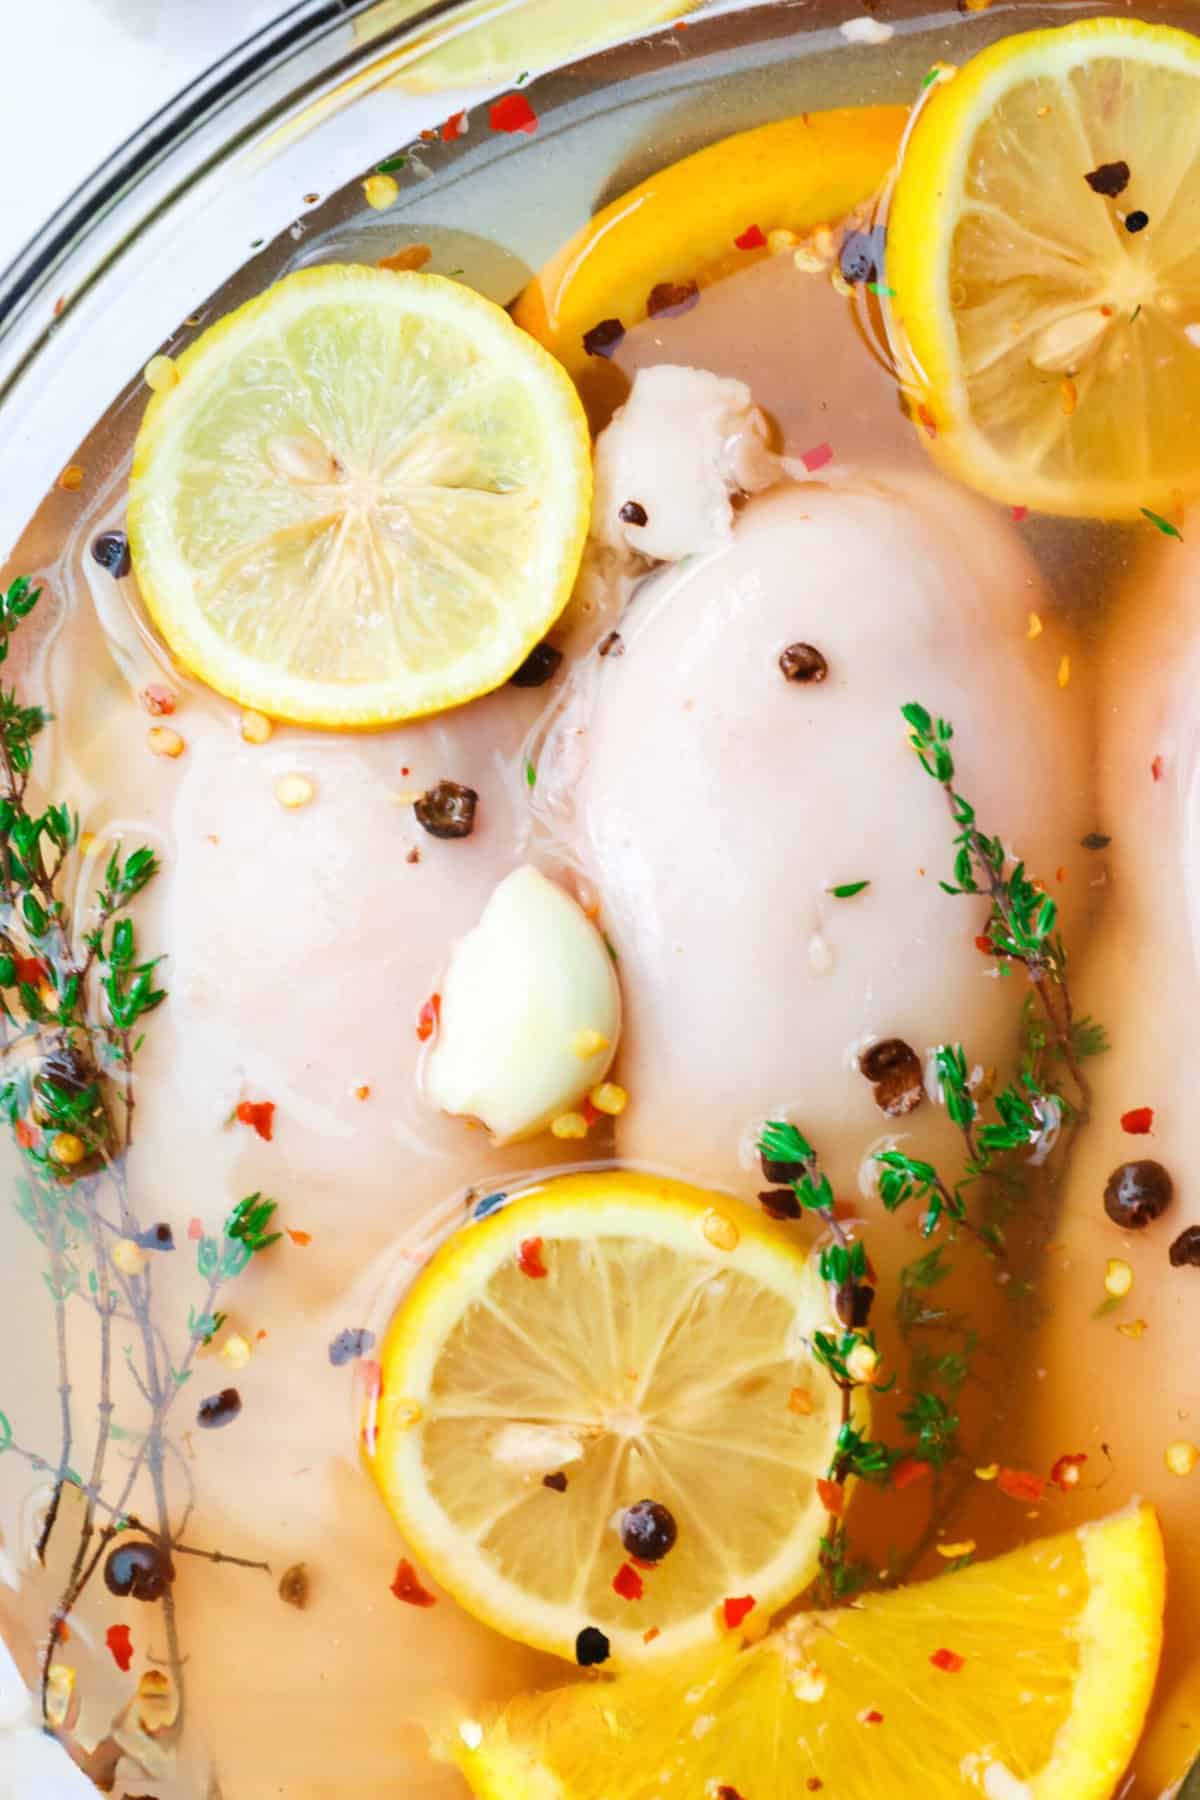 Orange, lemon, apple cider and herbs add flavor to the perfect brine for chicken breasts